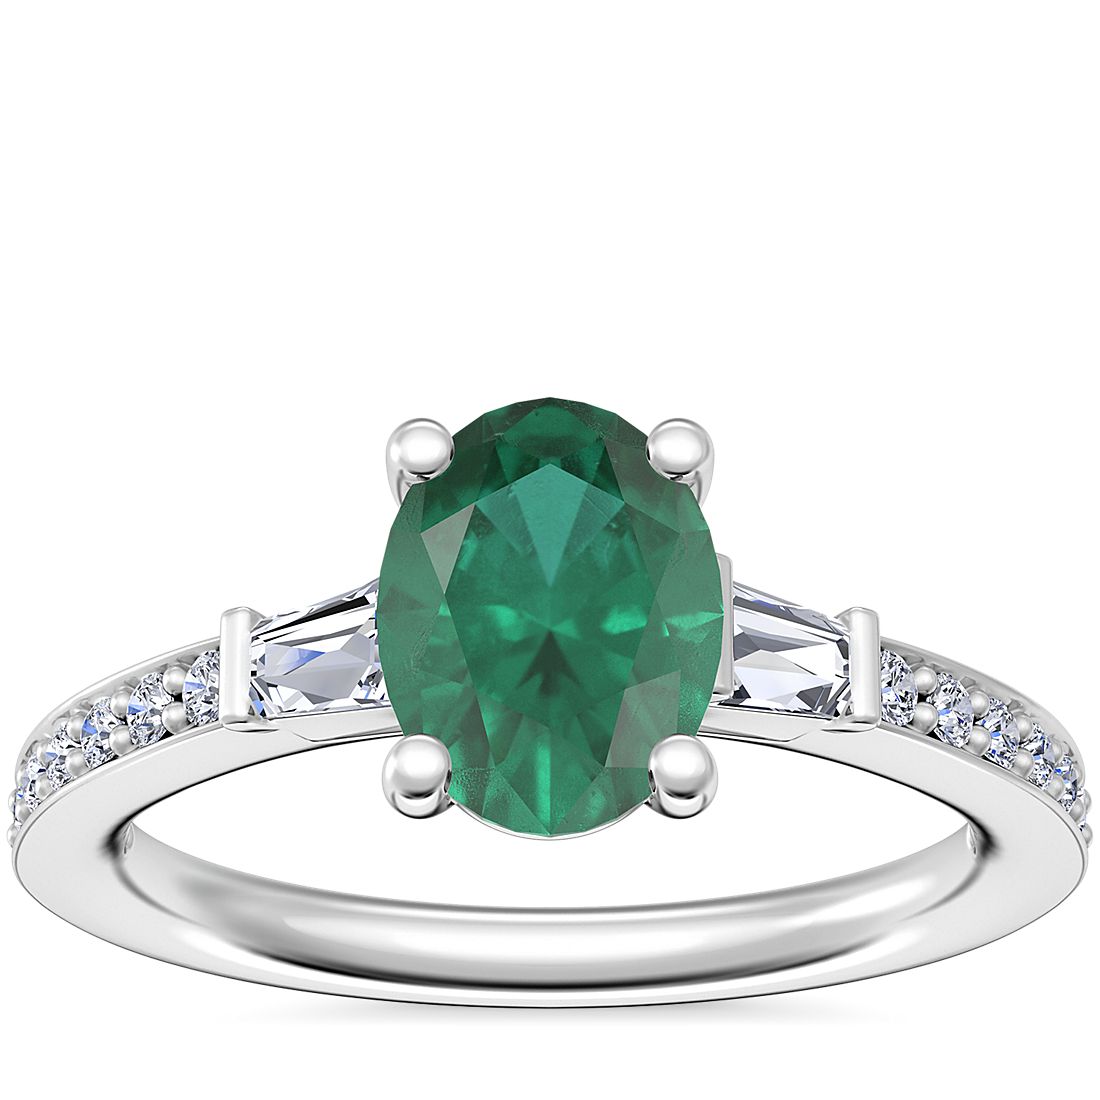 Tapered Baguette Diamond Cathedral Engagement Ring with Oval Emerald in 14k White Gold (8x6mm)